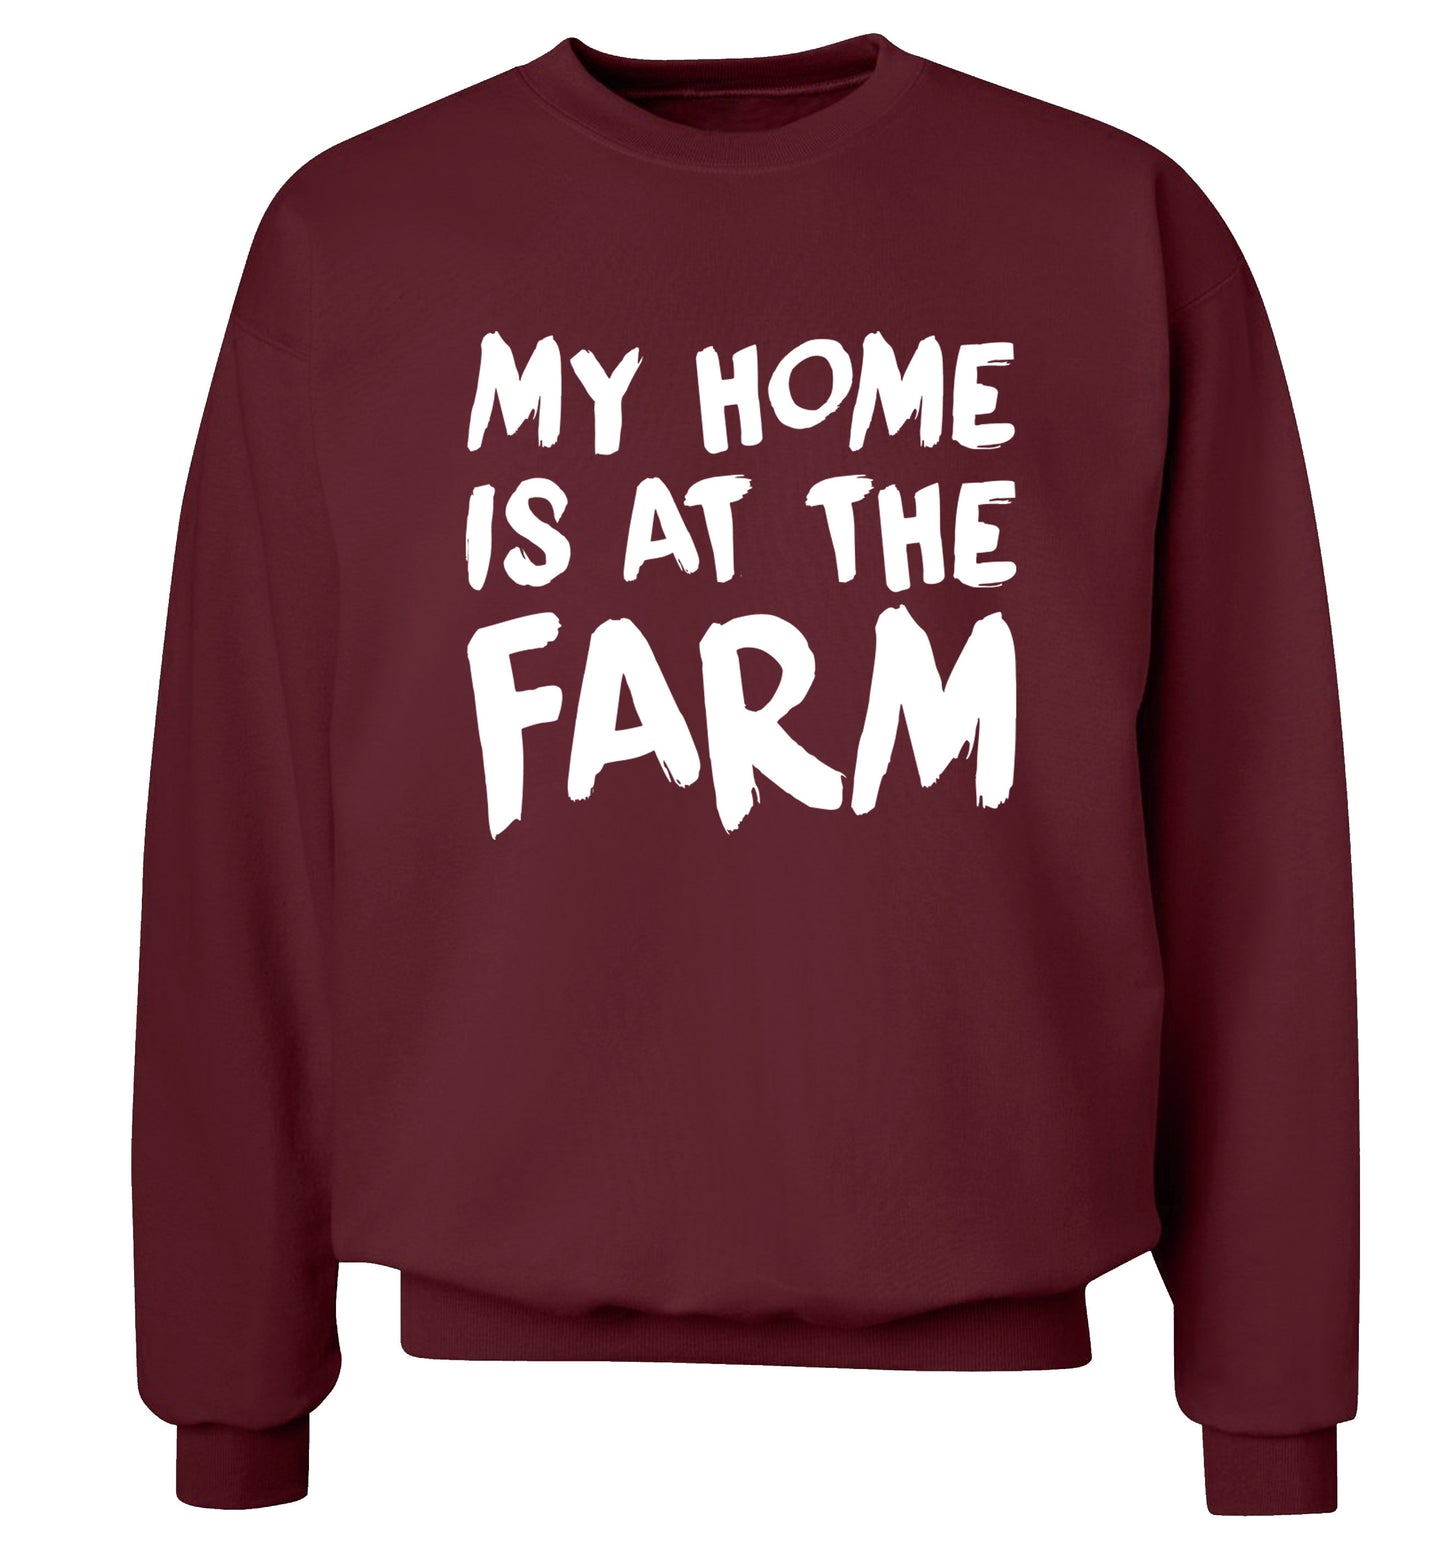 My home is at the farm Adult's unisex maroon Sweater 2XL